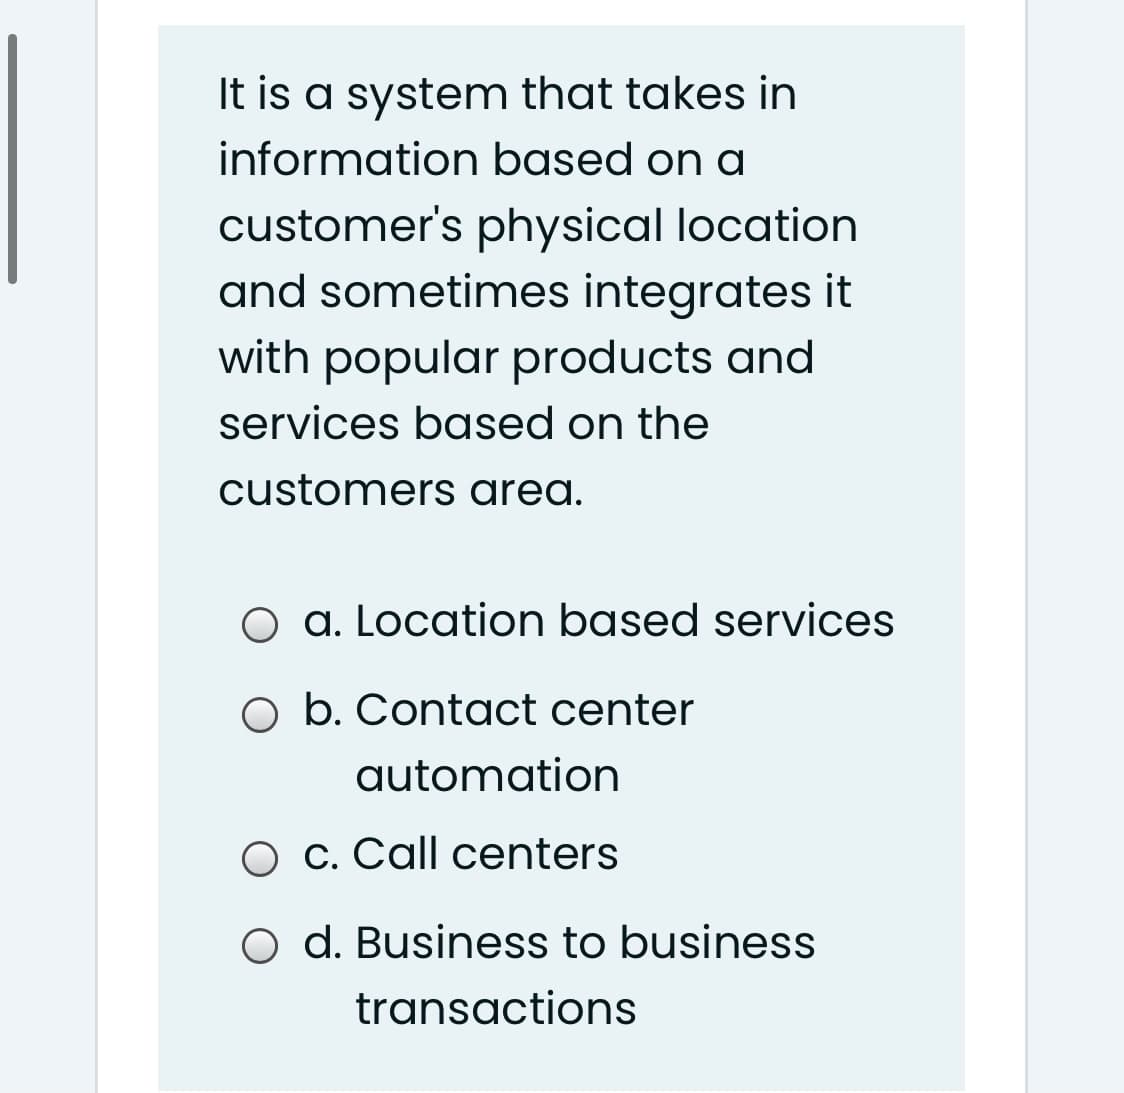 It is a system that takes in
information based on a
customer's physical location
and sometimes integrates it
with popular products and
services based on the
customers area.
O a. Location based services
O b. Contact center
automation
O c. Call centers
O d. Business to business
transactions
